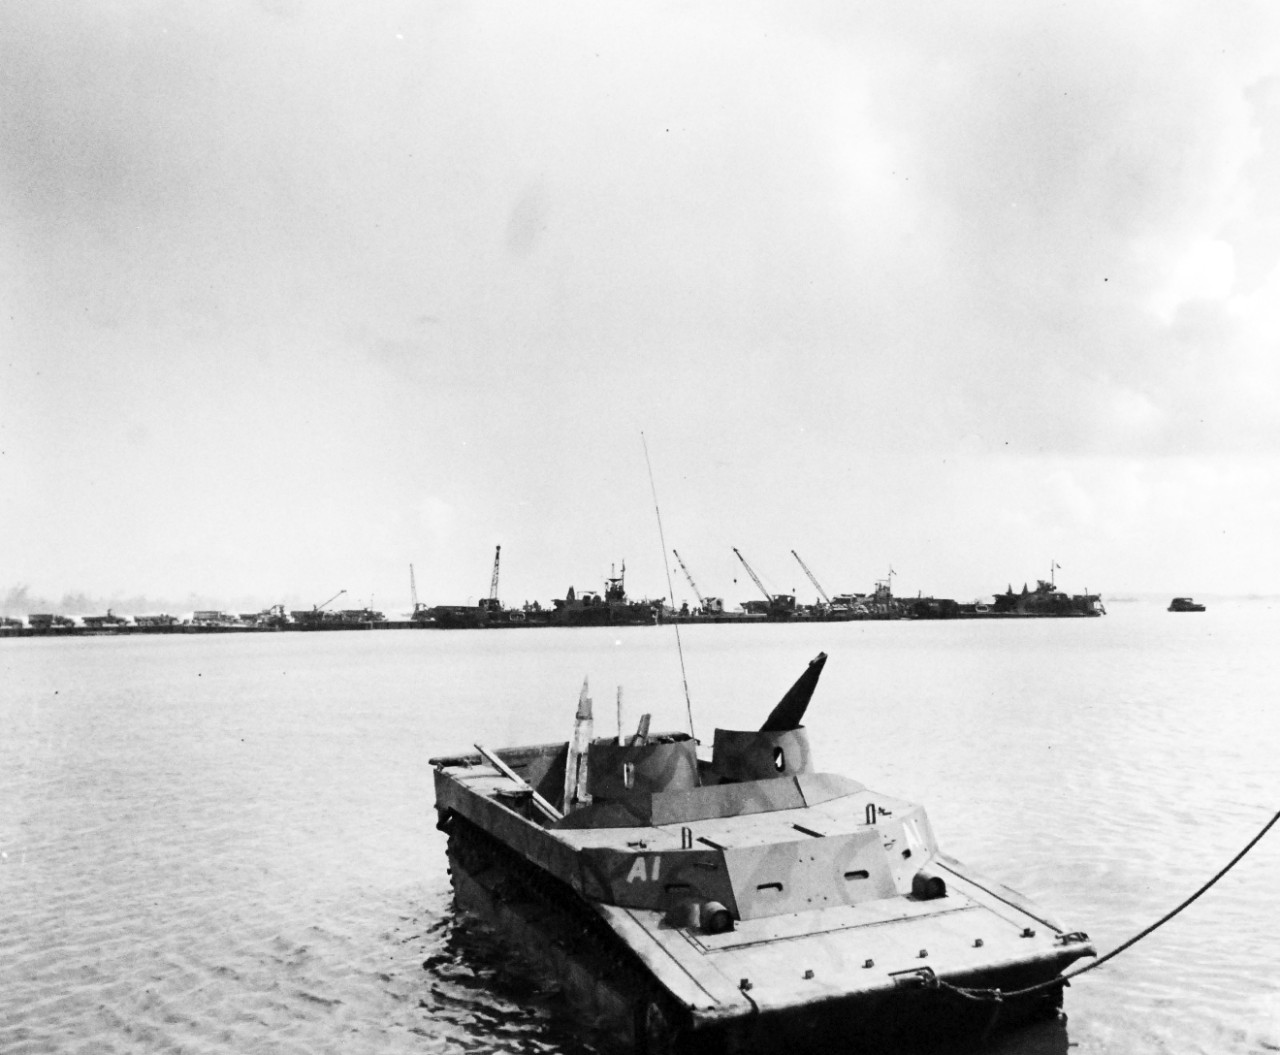 80-G-307736:  Invasion of Saipan, Charon Kanoa, June-July 1944.  U.S. pier at Charon Kanoa, Saipan, with an LVT in foreground.   Photograph received March 20, 1945.      Official U.S. Navy Photograph, now in the collections of the U.S. Navy.  (2017/04/11).  